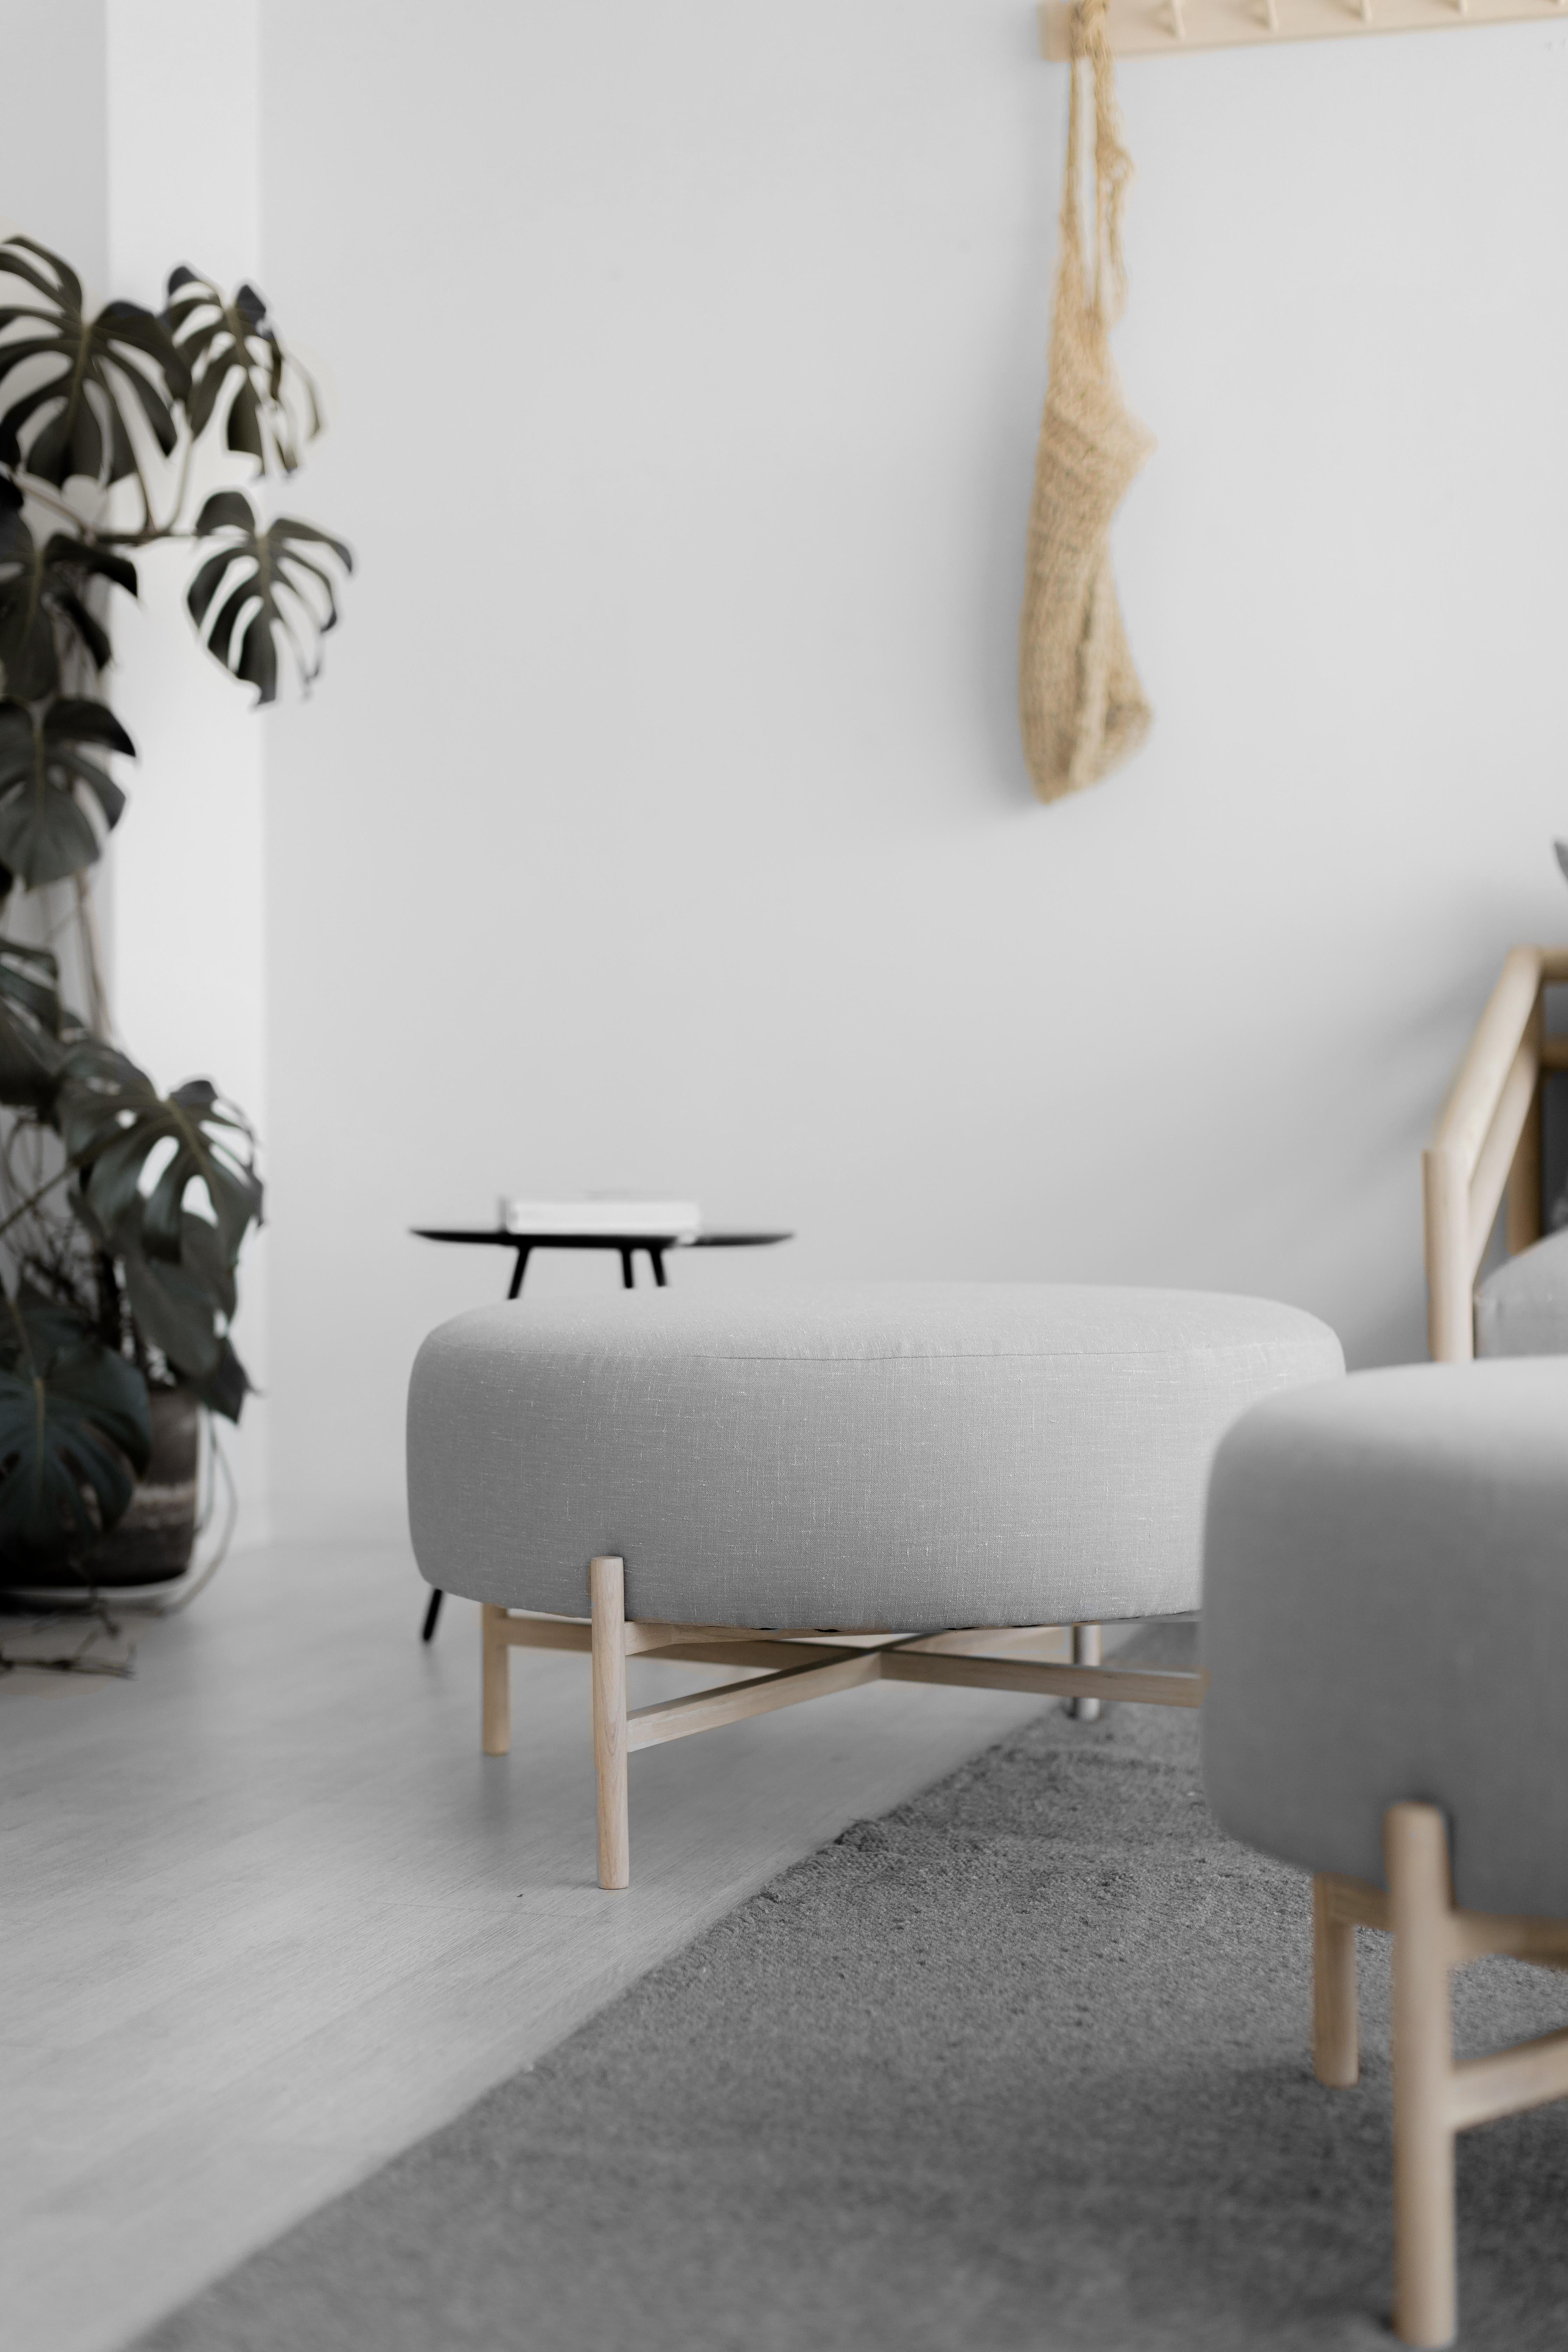 The Mar Ottoman is a distinguished piece by its simplicity and versatility that allows it to be a great complement to any space. It is composed of solid wood and upholstery, which makes it a very cozy piece of furniture. Its neutral colors and